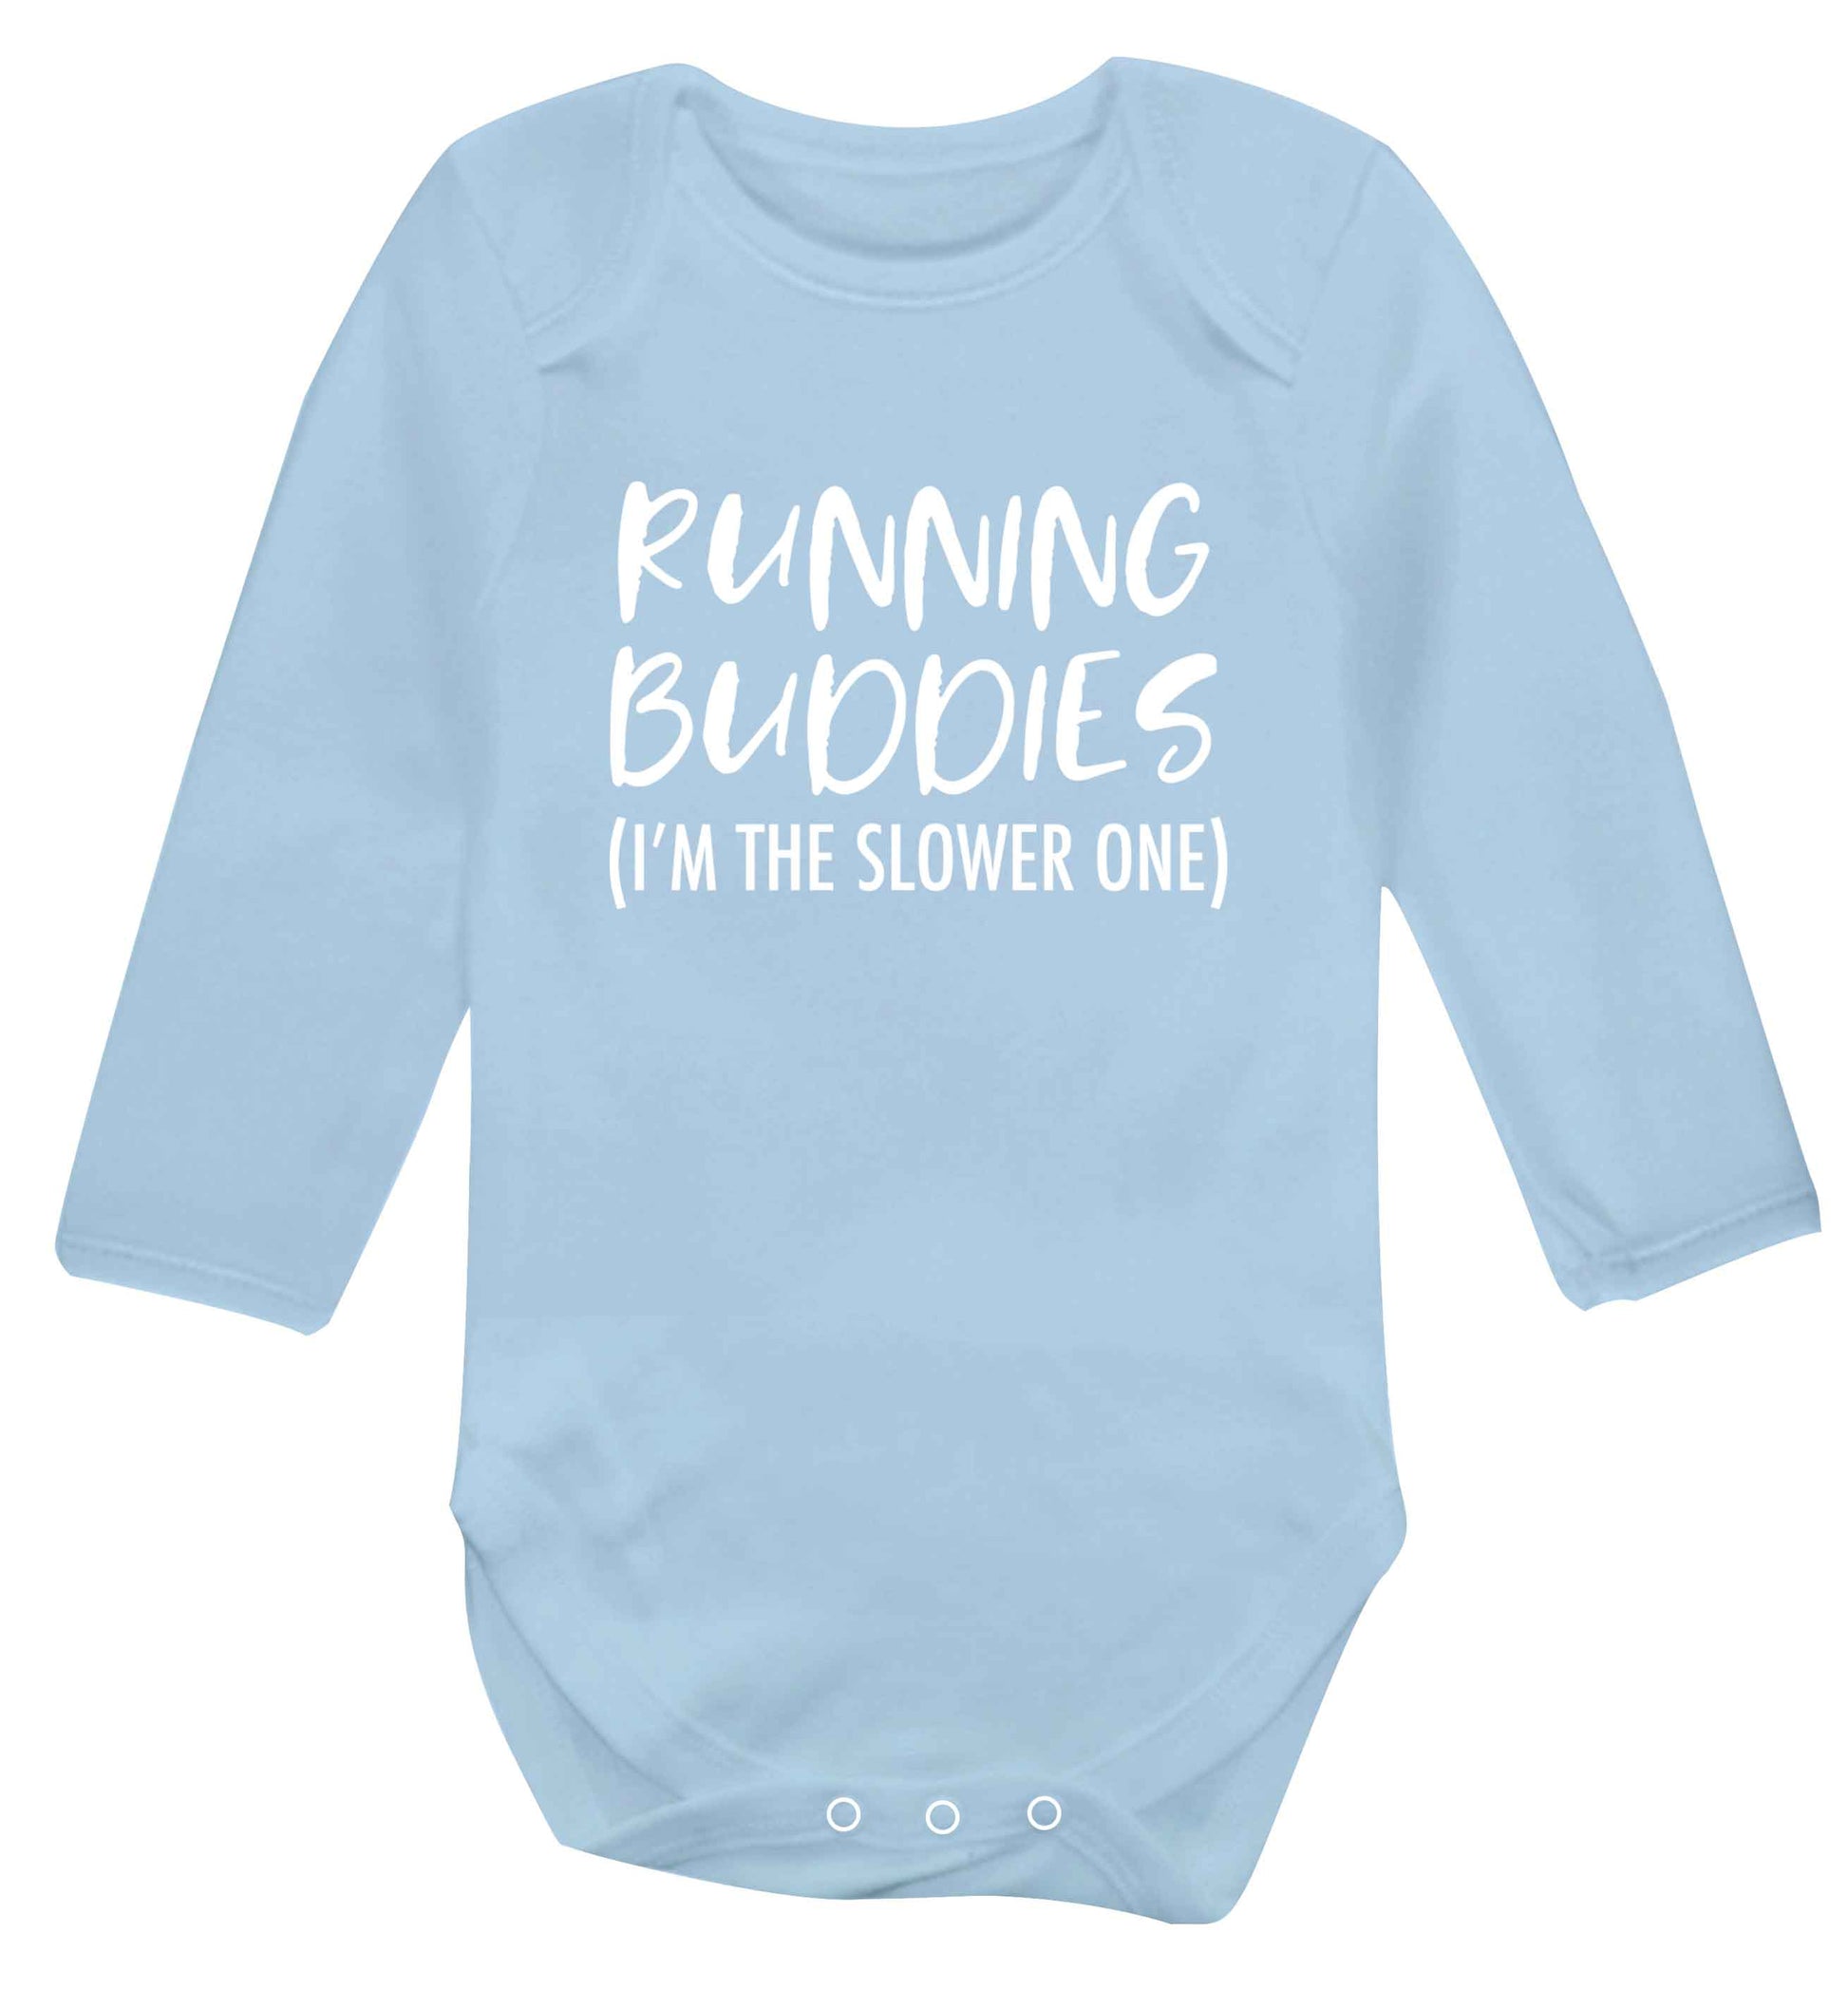 Running buddies (I'm the slower one) baby vest long sleeved pale blue 6-12 months